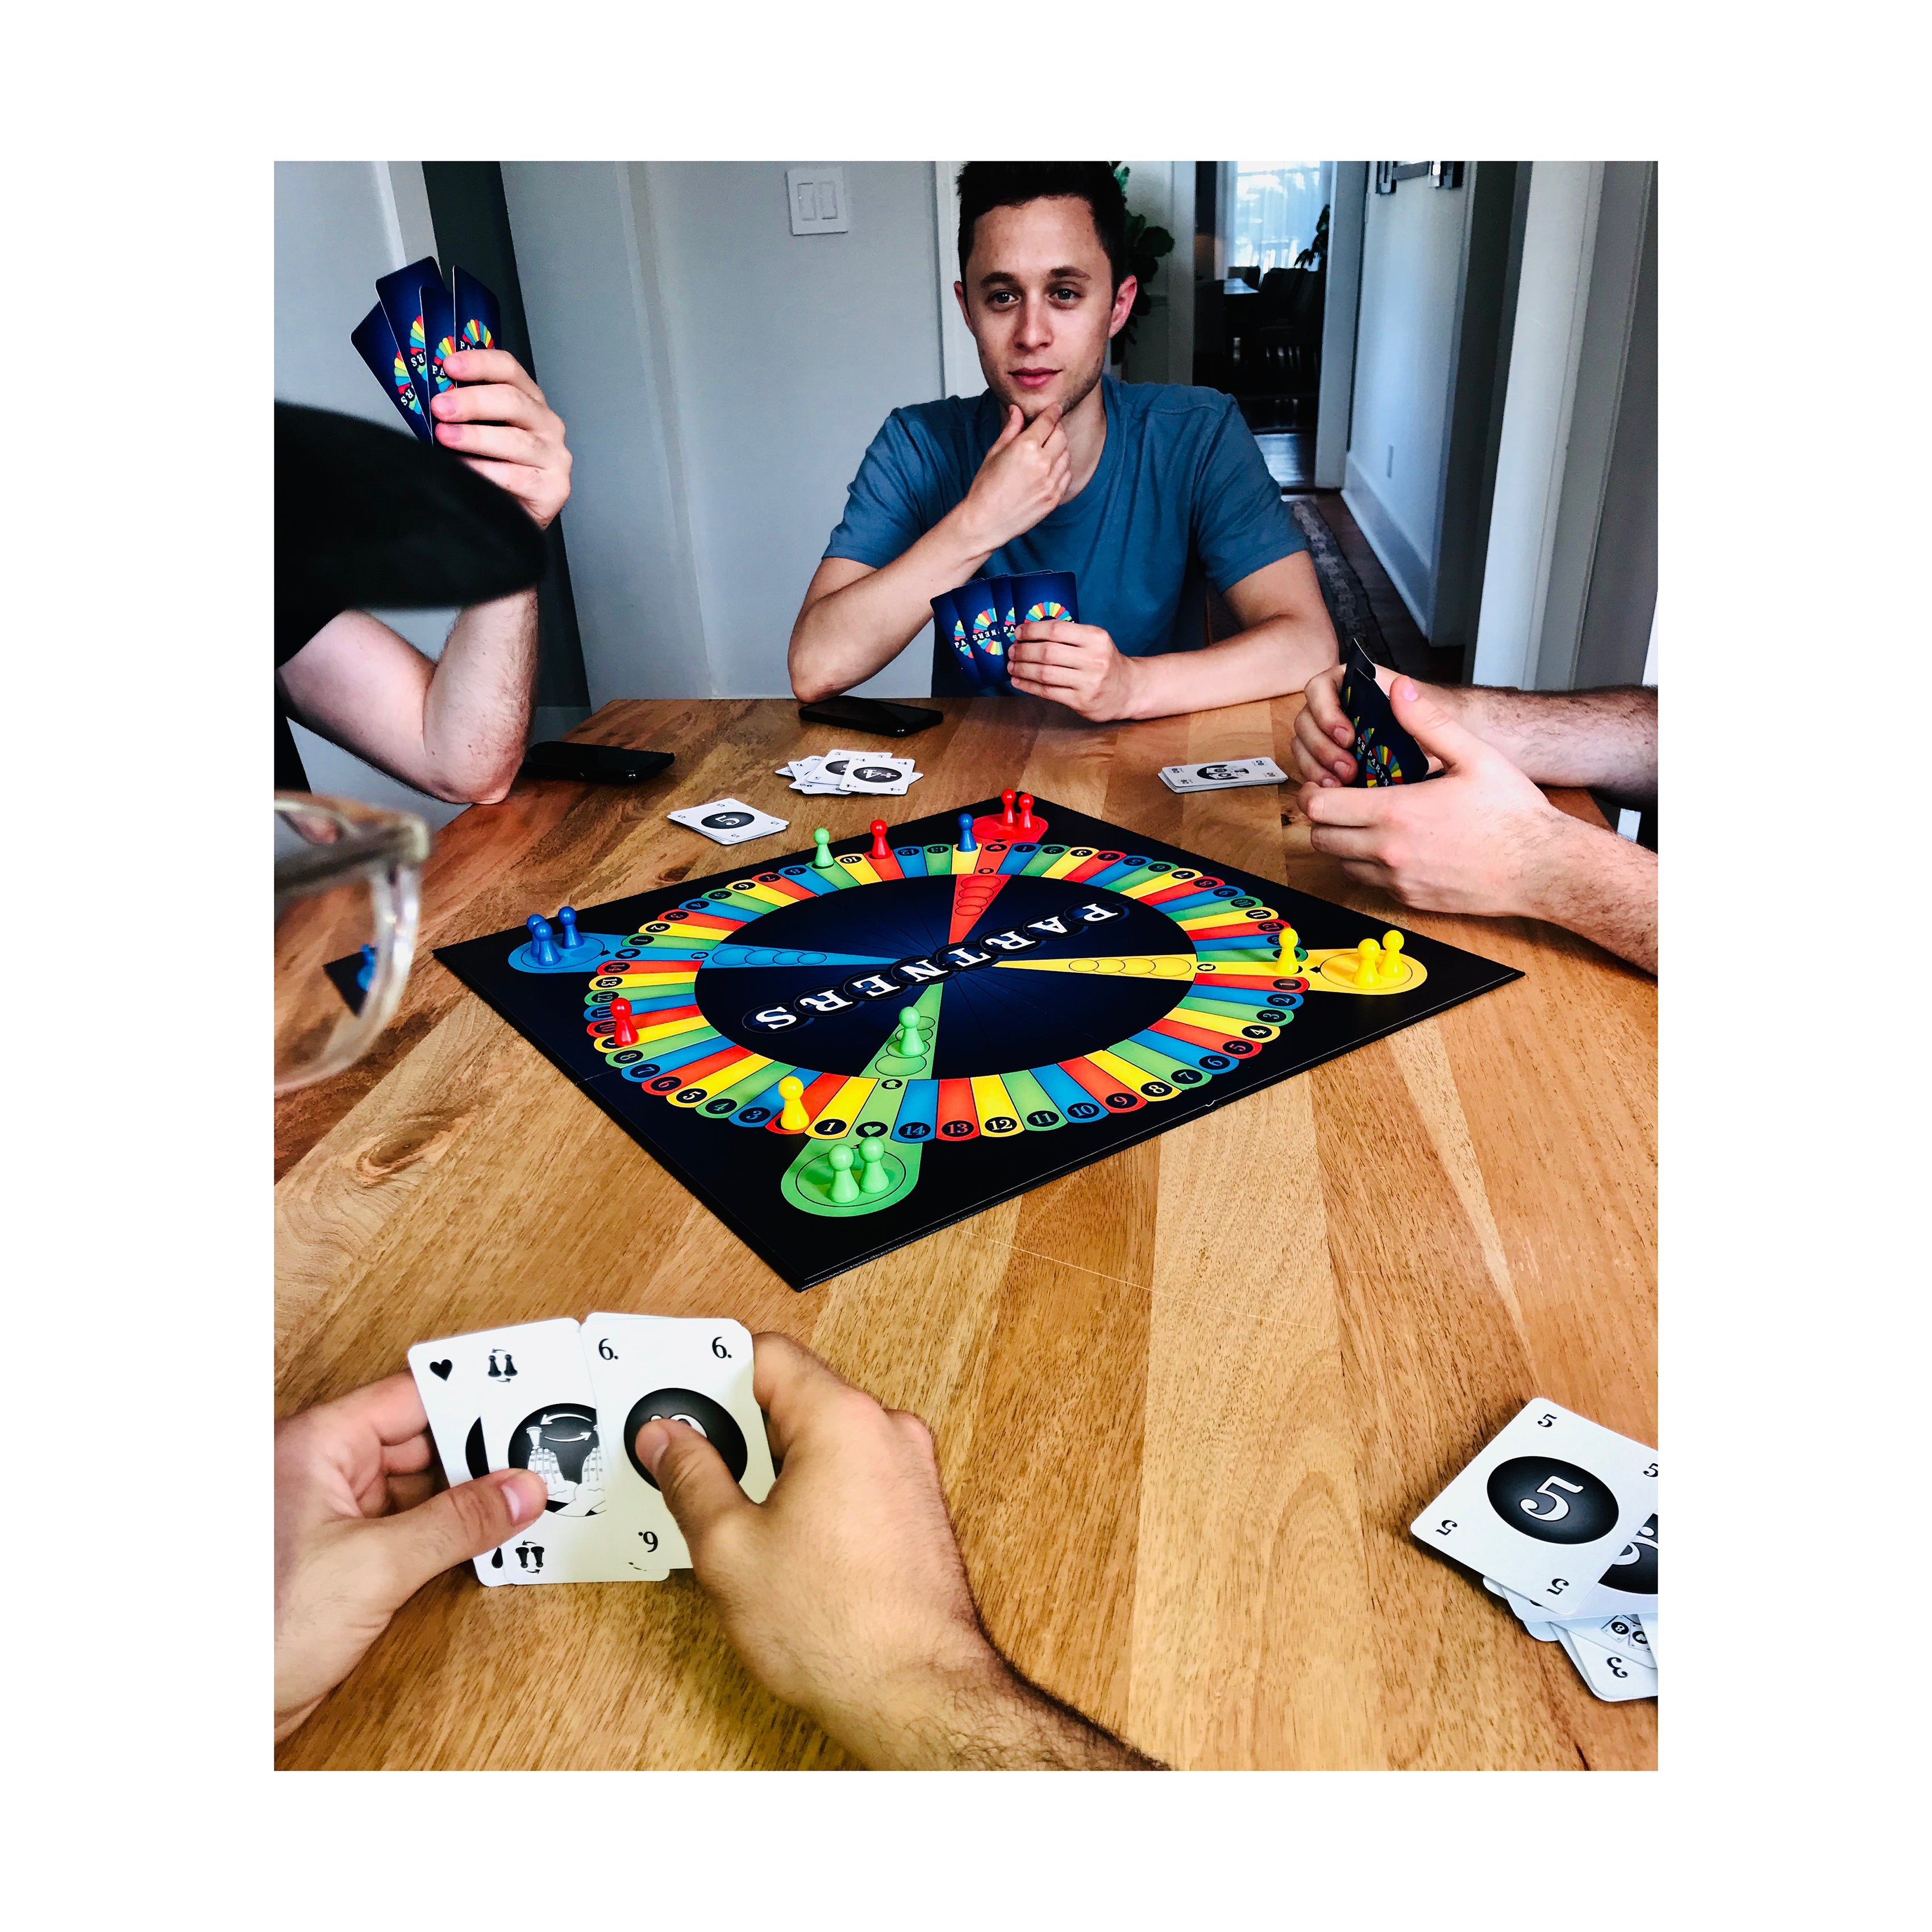 People Playing Board Games: rs